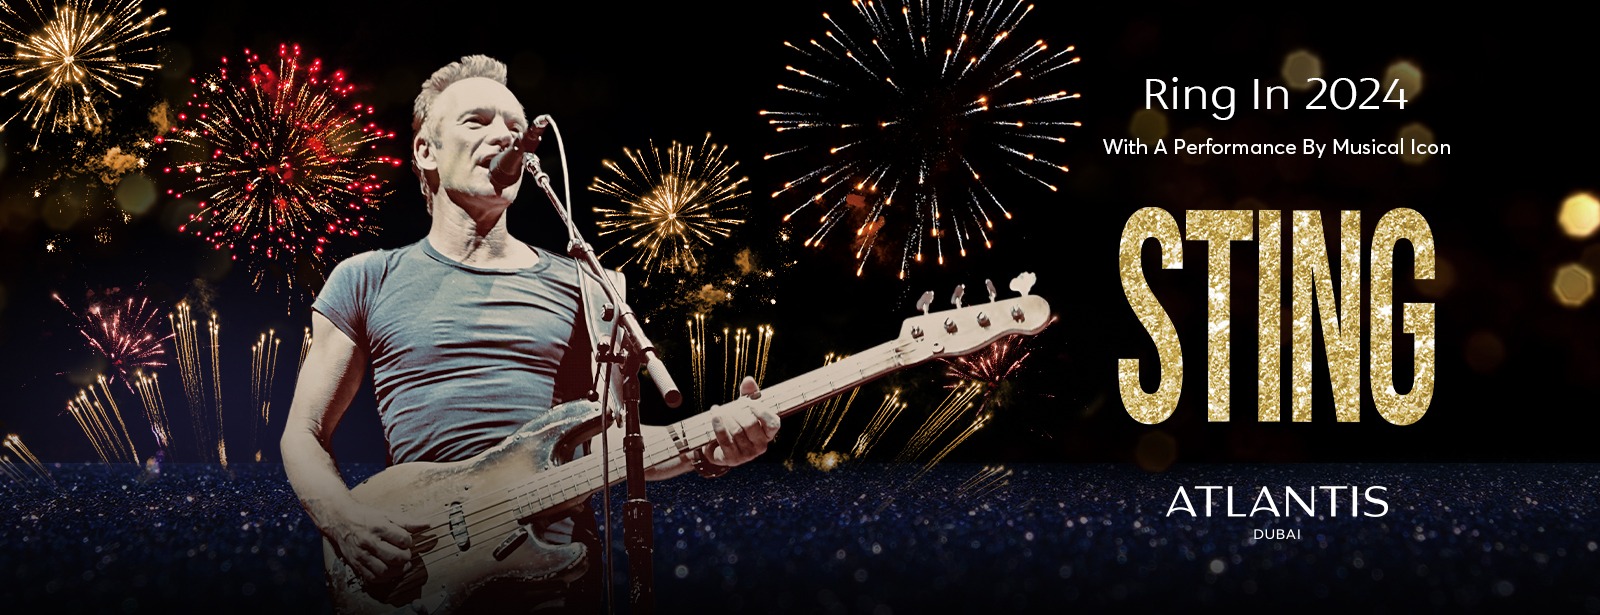 Sting Live Concert In Dubai with New Year’s Eve Gala Dinner - Coming Soon in UAE